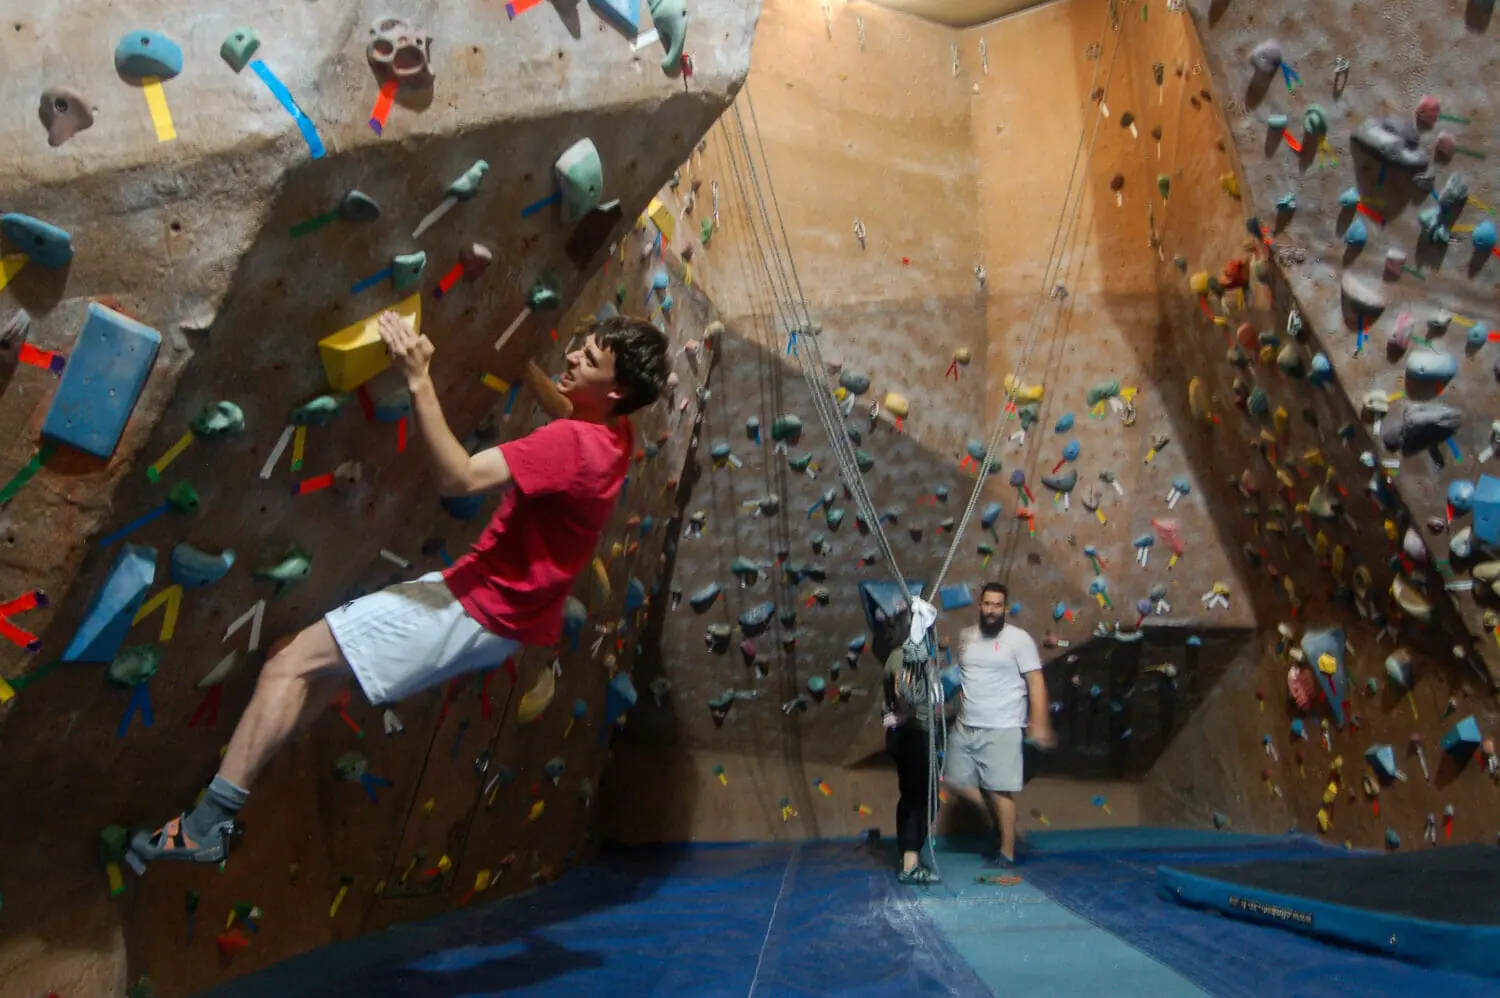 In this image: James Wise climbs a bouldering wall at the Dalplex.